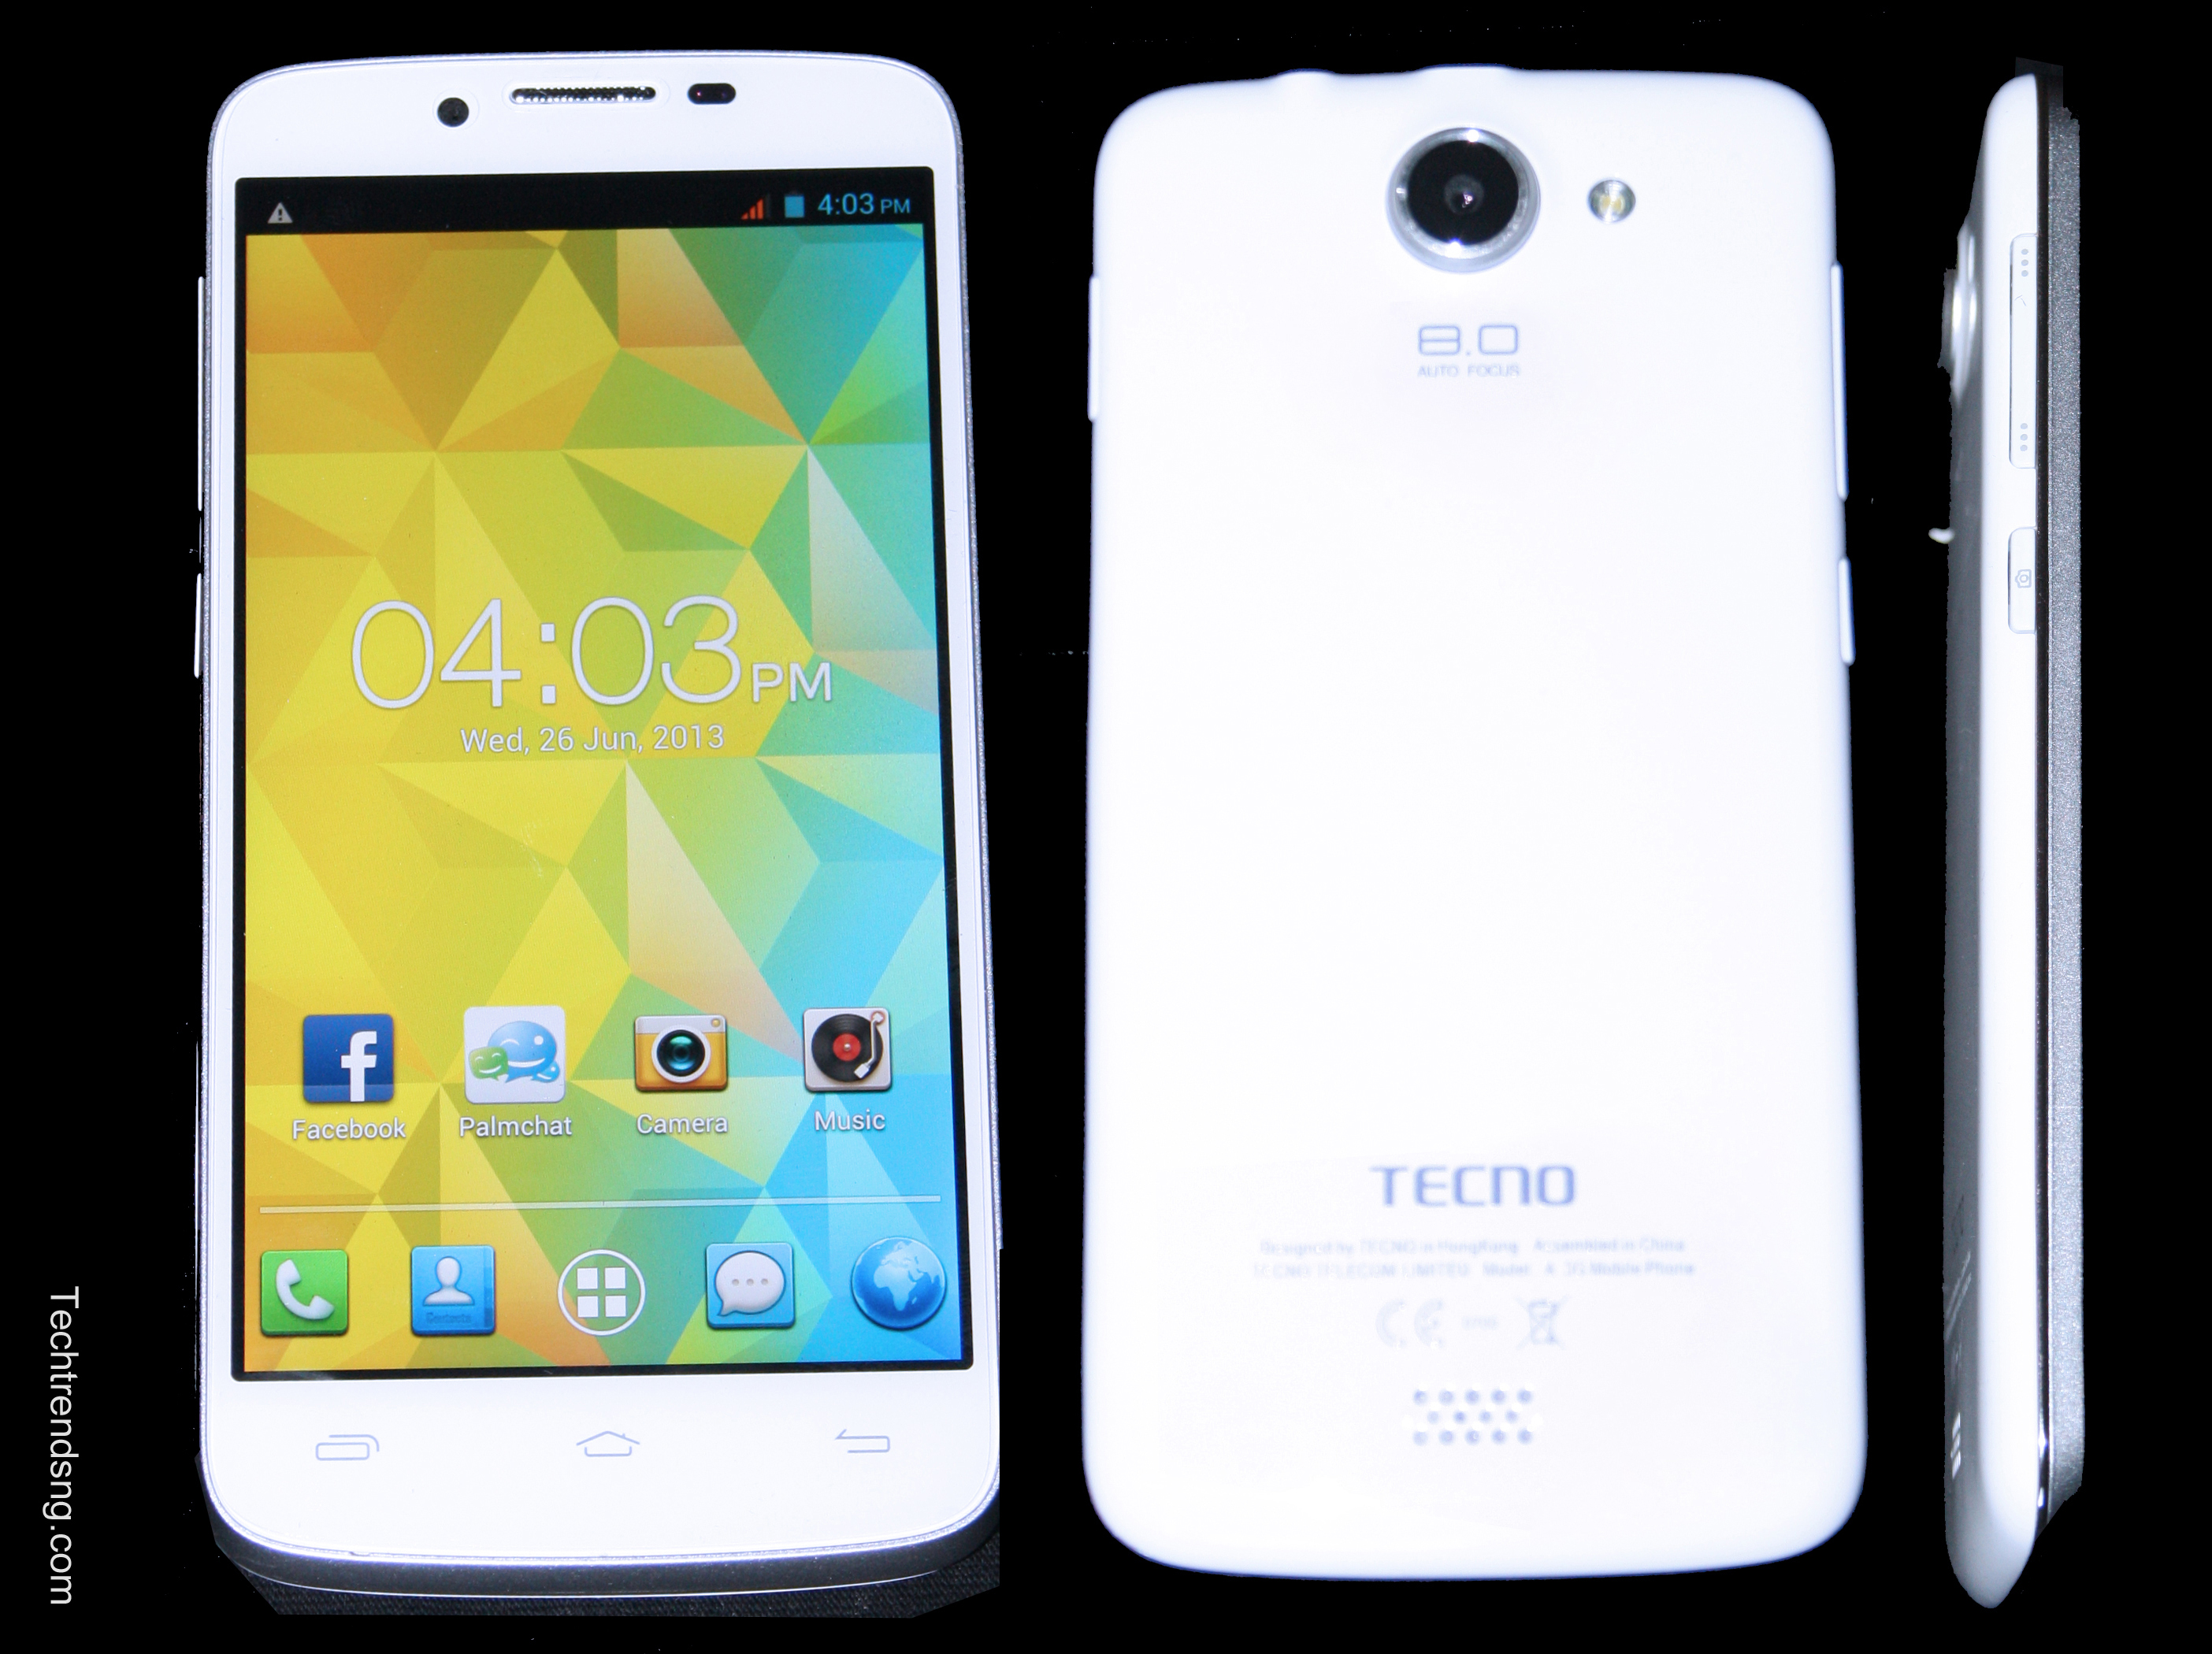 TECNO Phantom A (F7)-Elegance, Stylish and Affordable Android Smartphone.
  